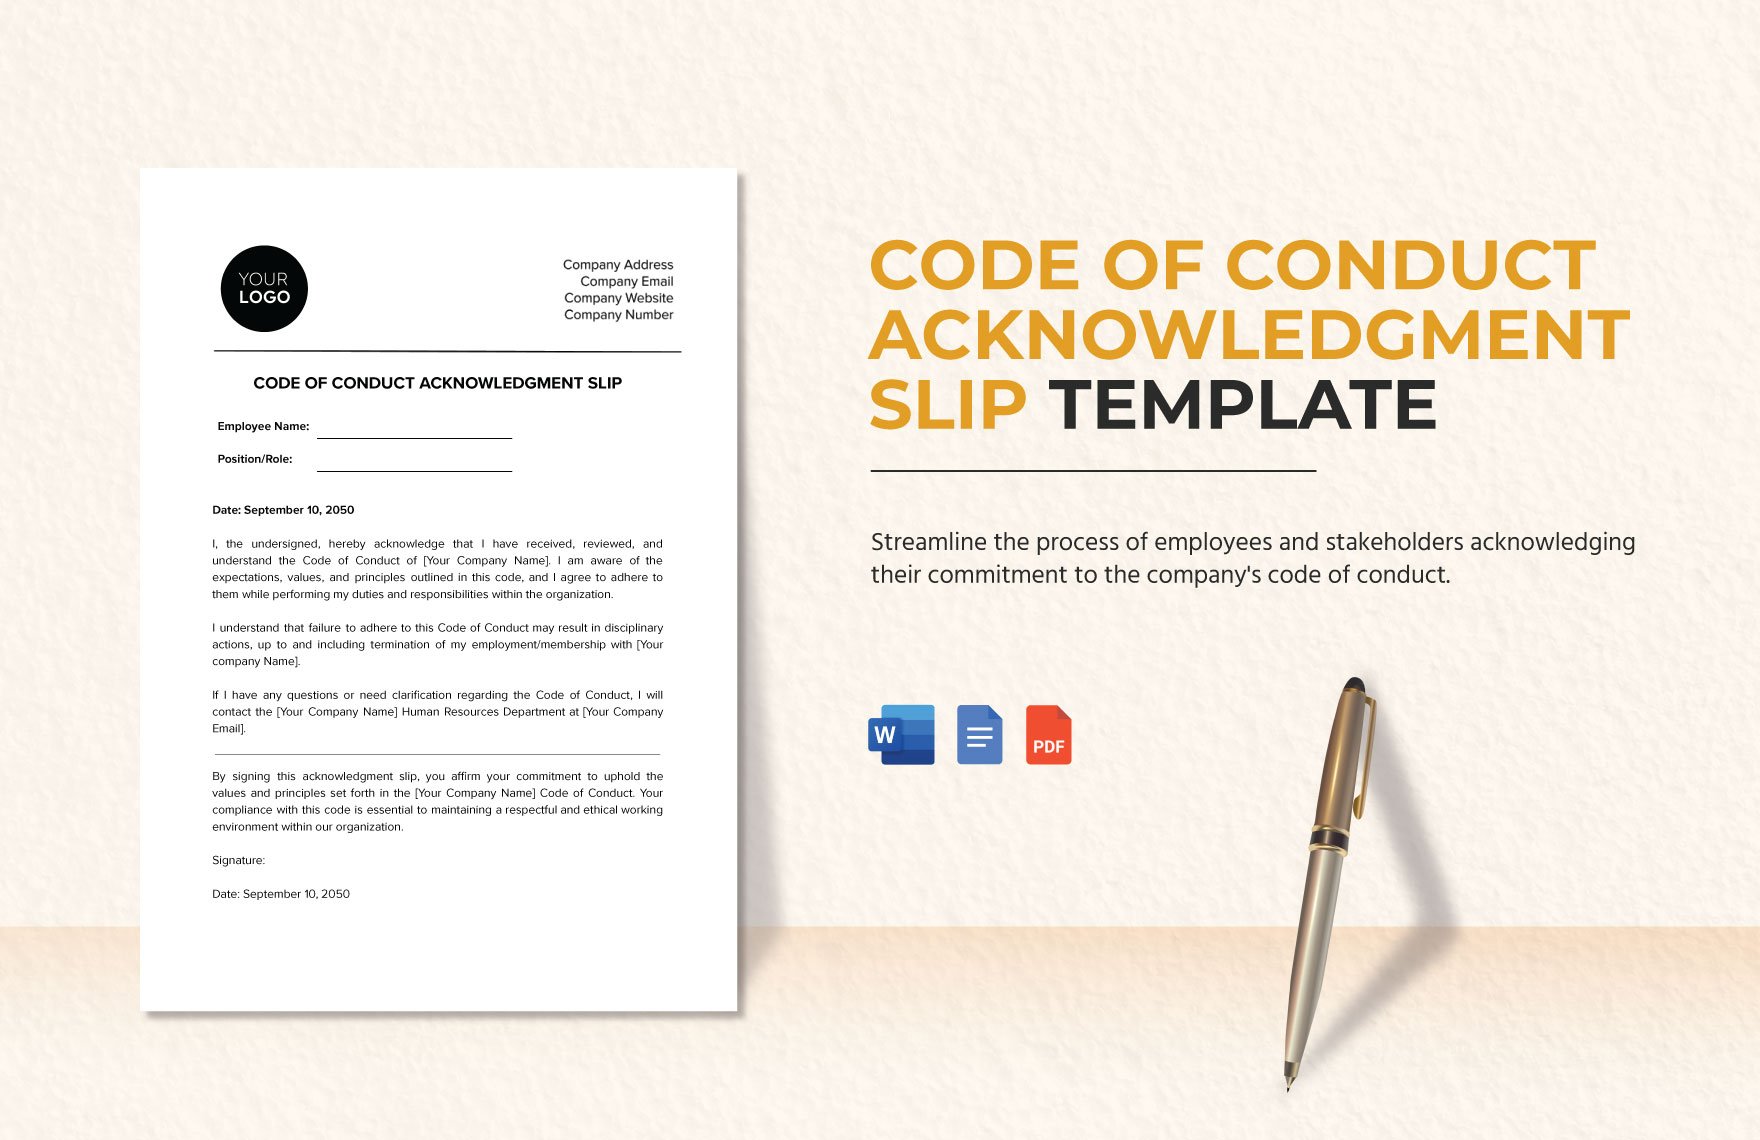 Code of Conduct Acknowledgment Slip HR Template in Word, Google Docs, PDF